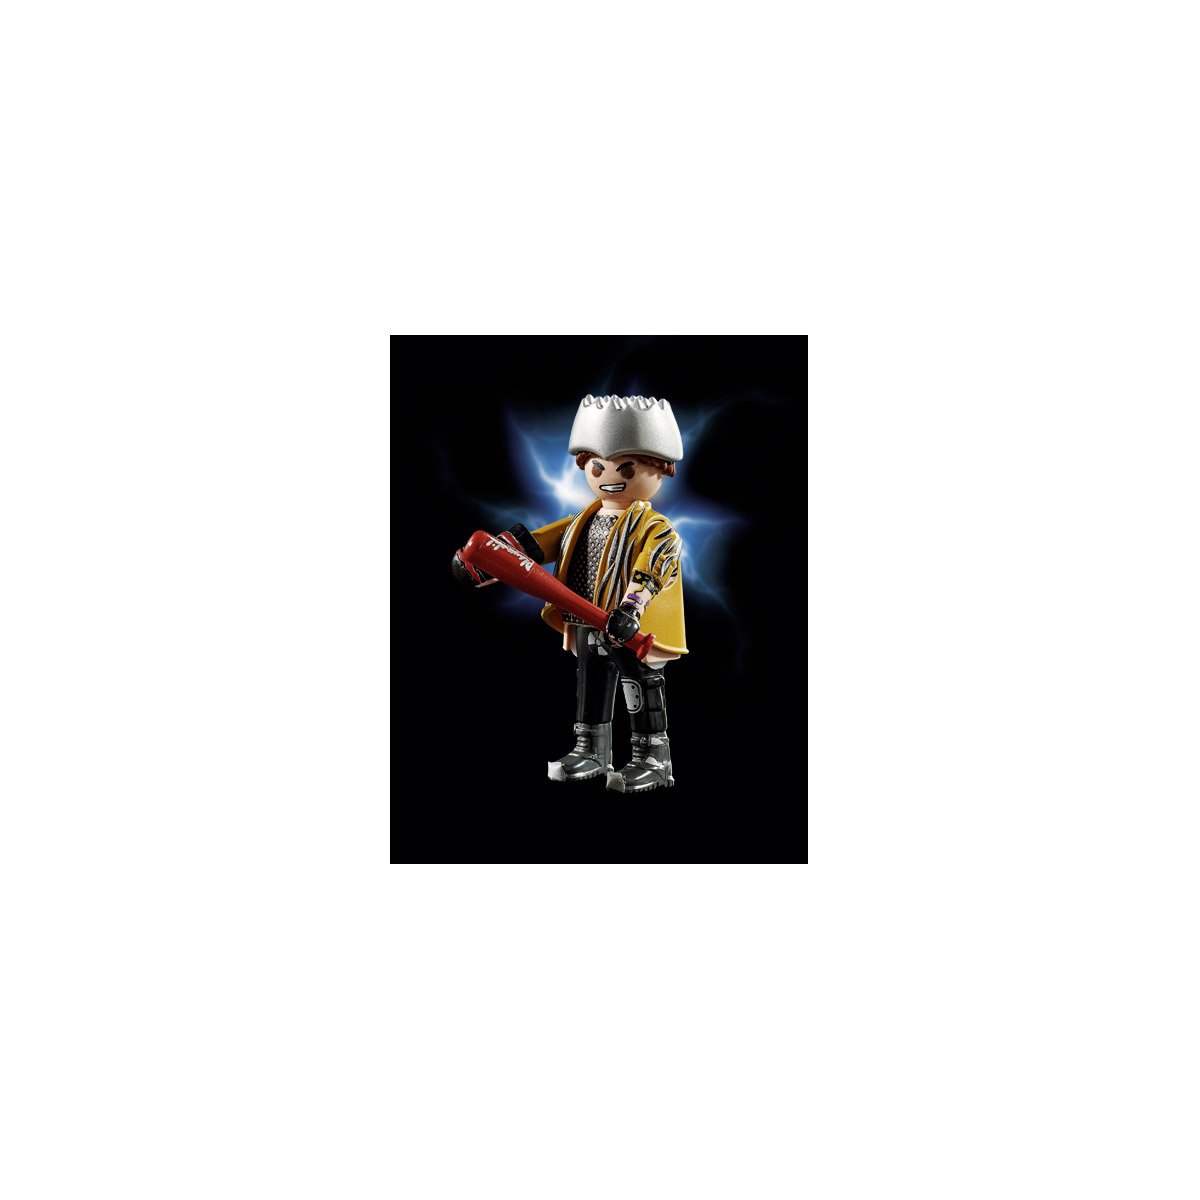 Jouets (Playmobil Back to the Future) - Course d'hoverboard (70634)